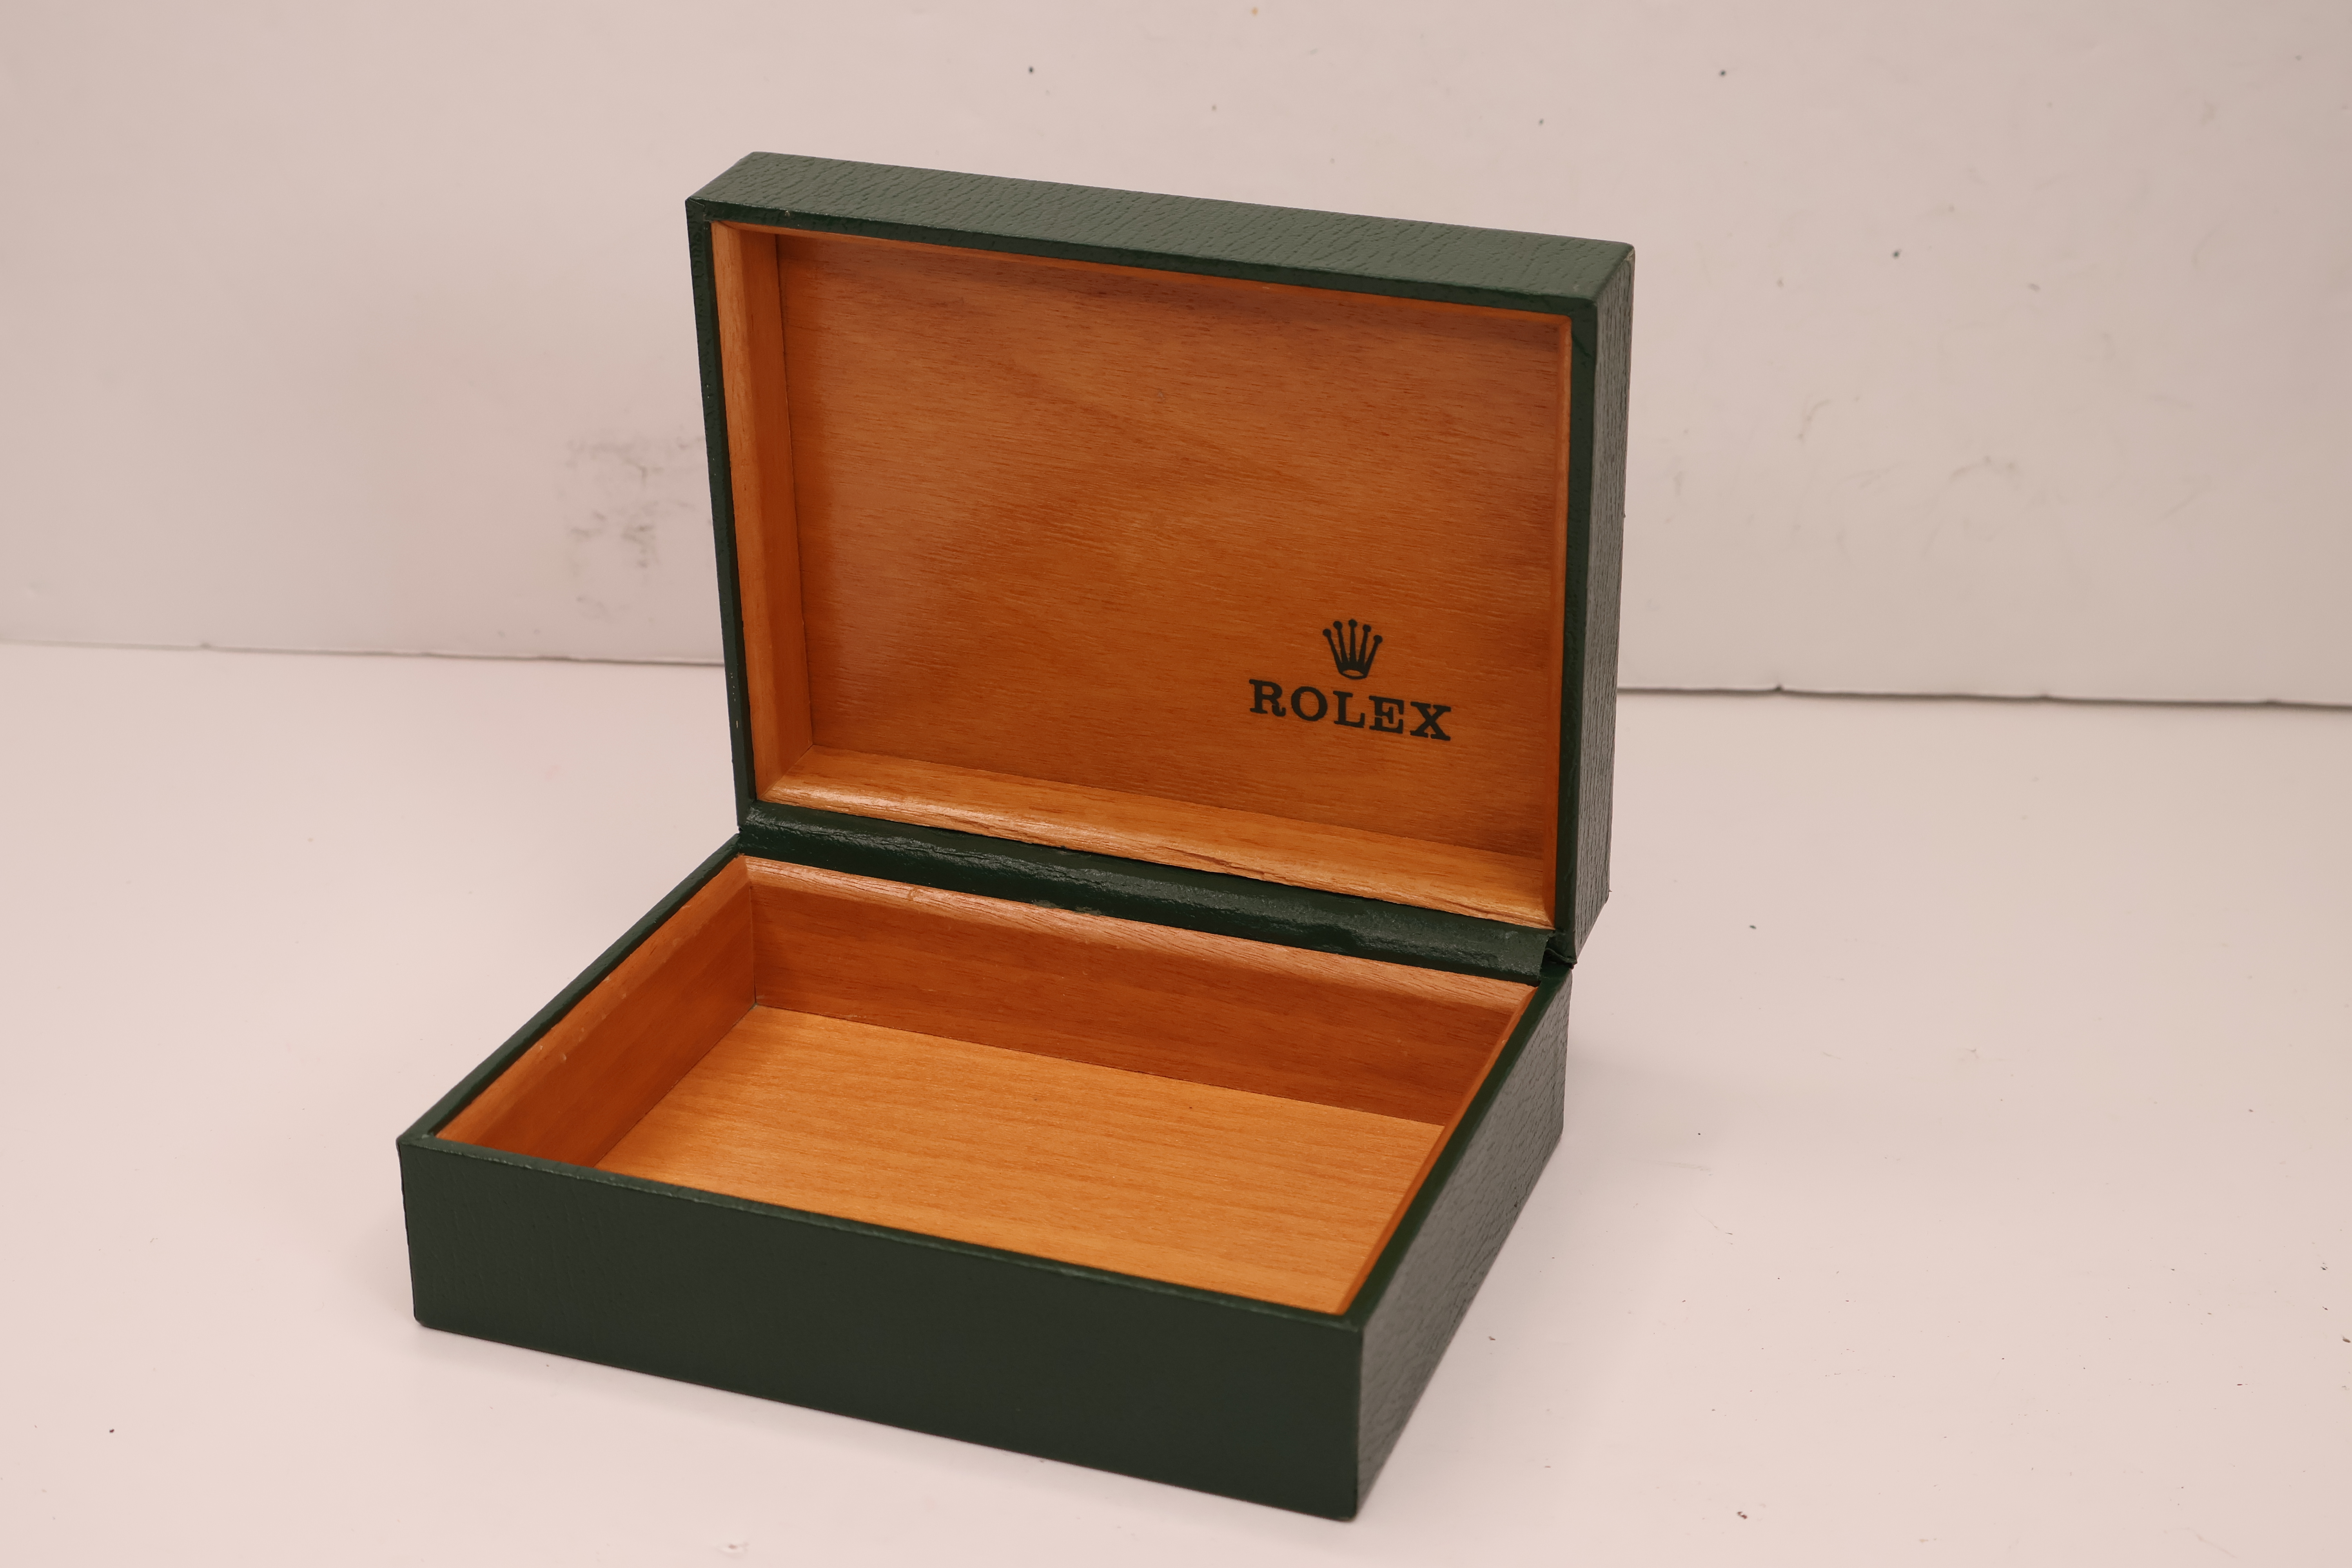 *To Be Sold Without Reserve* Rolex vintage green with gilt trim, no interior